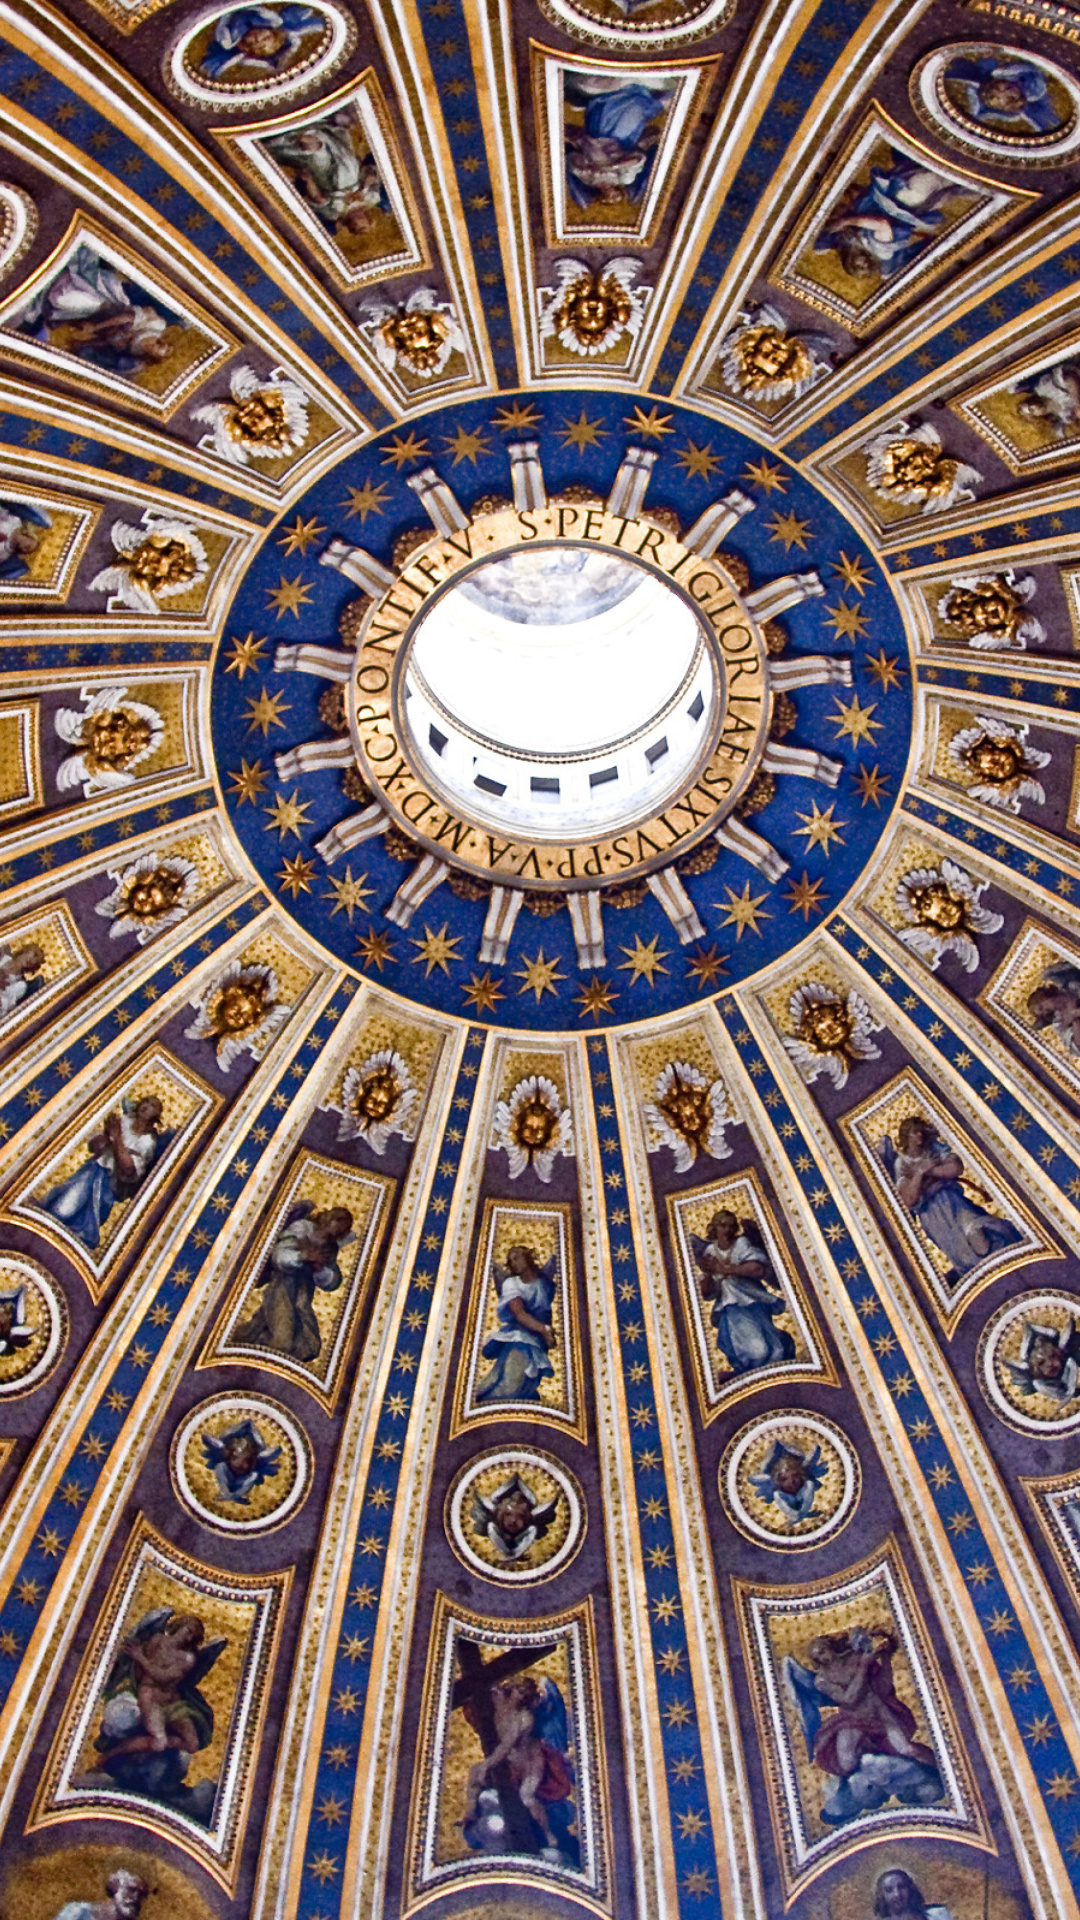 Papal Basilica of St Peter in the Vatican wallpaper 1080x1920